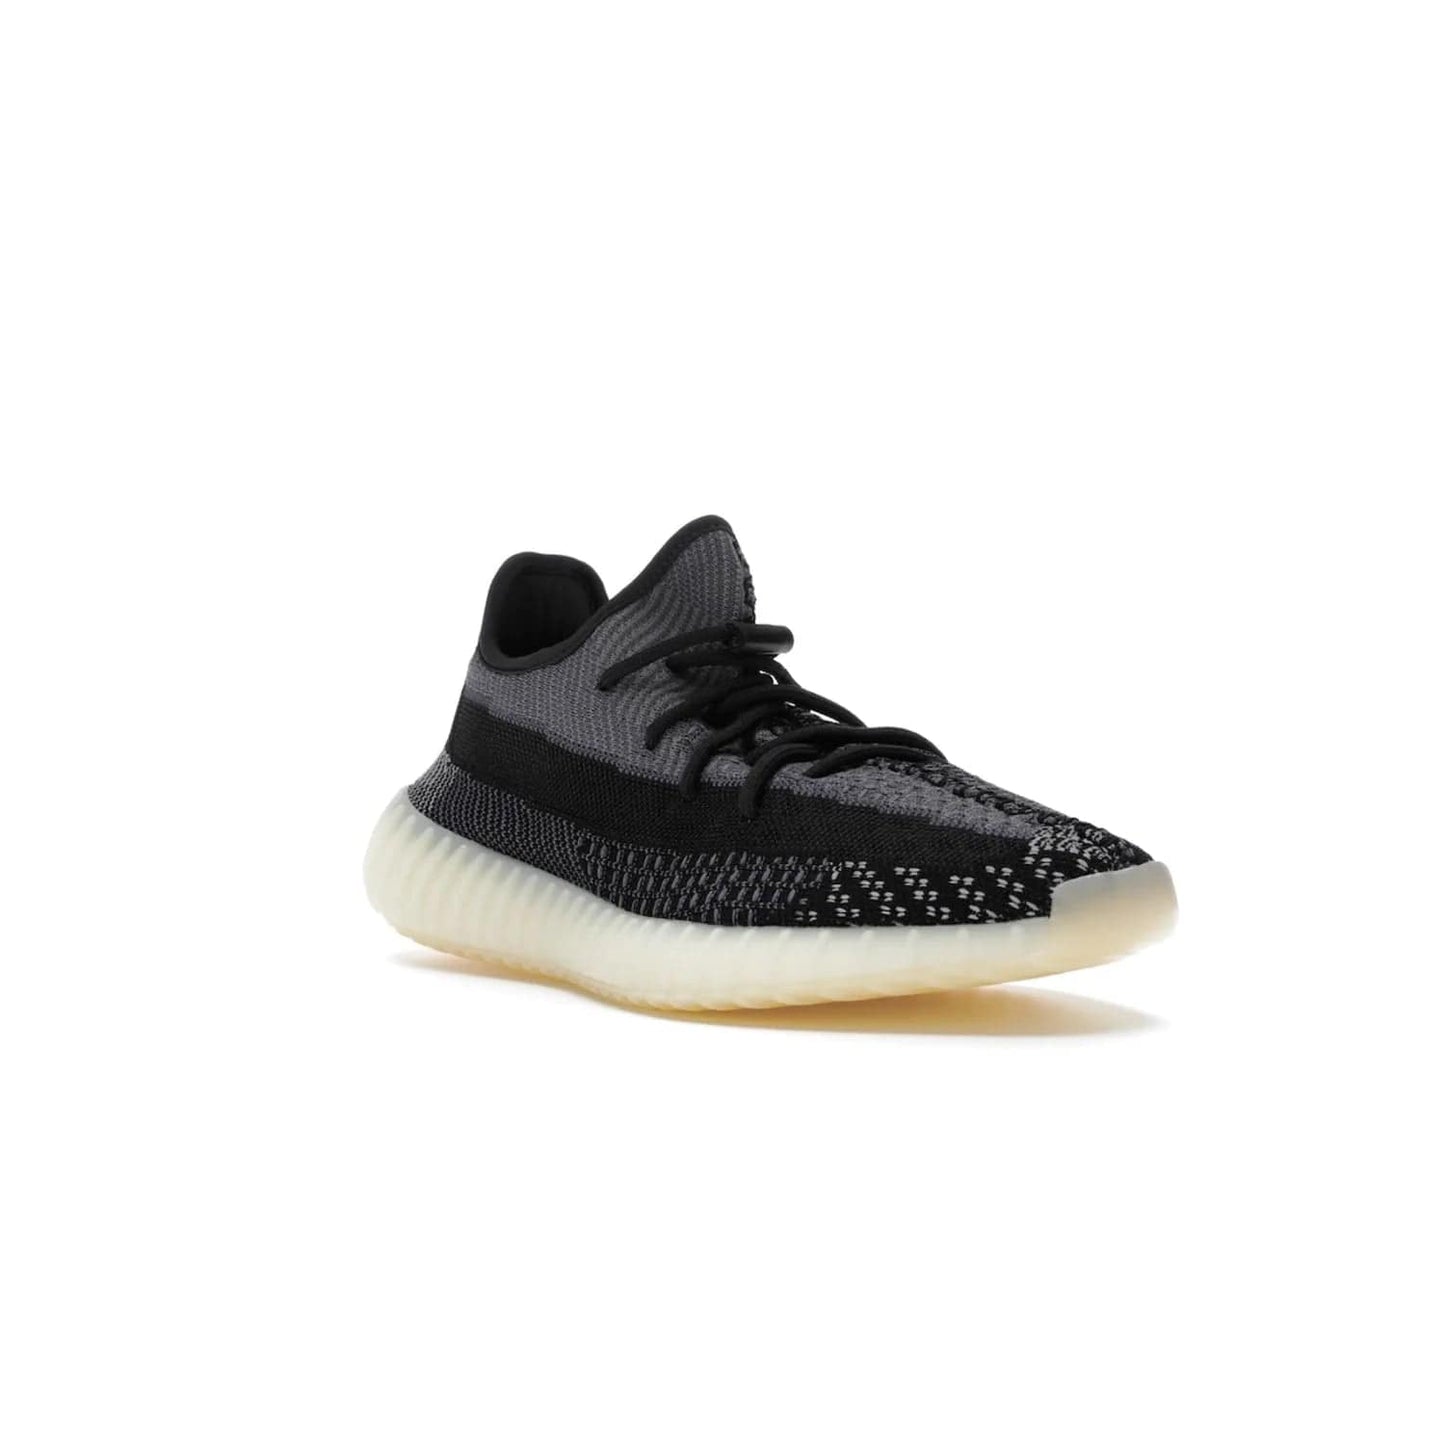 adidas Yeezy Boost 350 V2 Carbon - Image 6 - Only at www.BallersClubKickz.com - Introducing the adidas Yeezy Boost 350 V2 Carbon. Iconic sneaker with a dark-hued upper, breathable Primeknit mesh, signature side stripe, off-white midsole & BOOST cushioning. Perfect for any sneaker lover. Released October 2020.